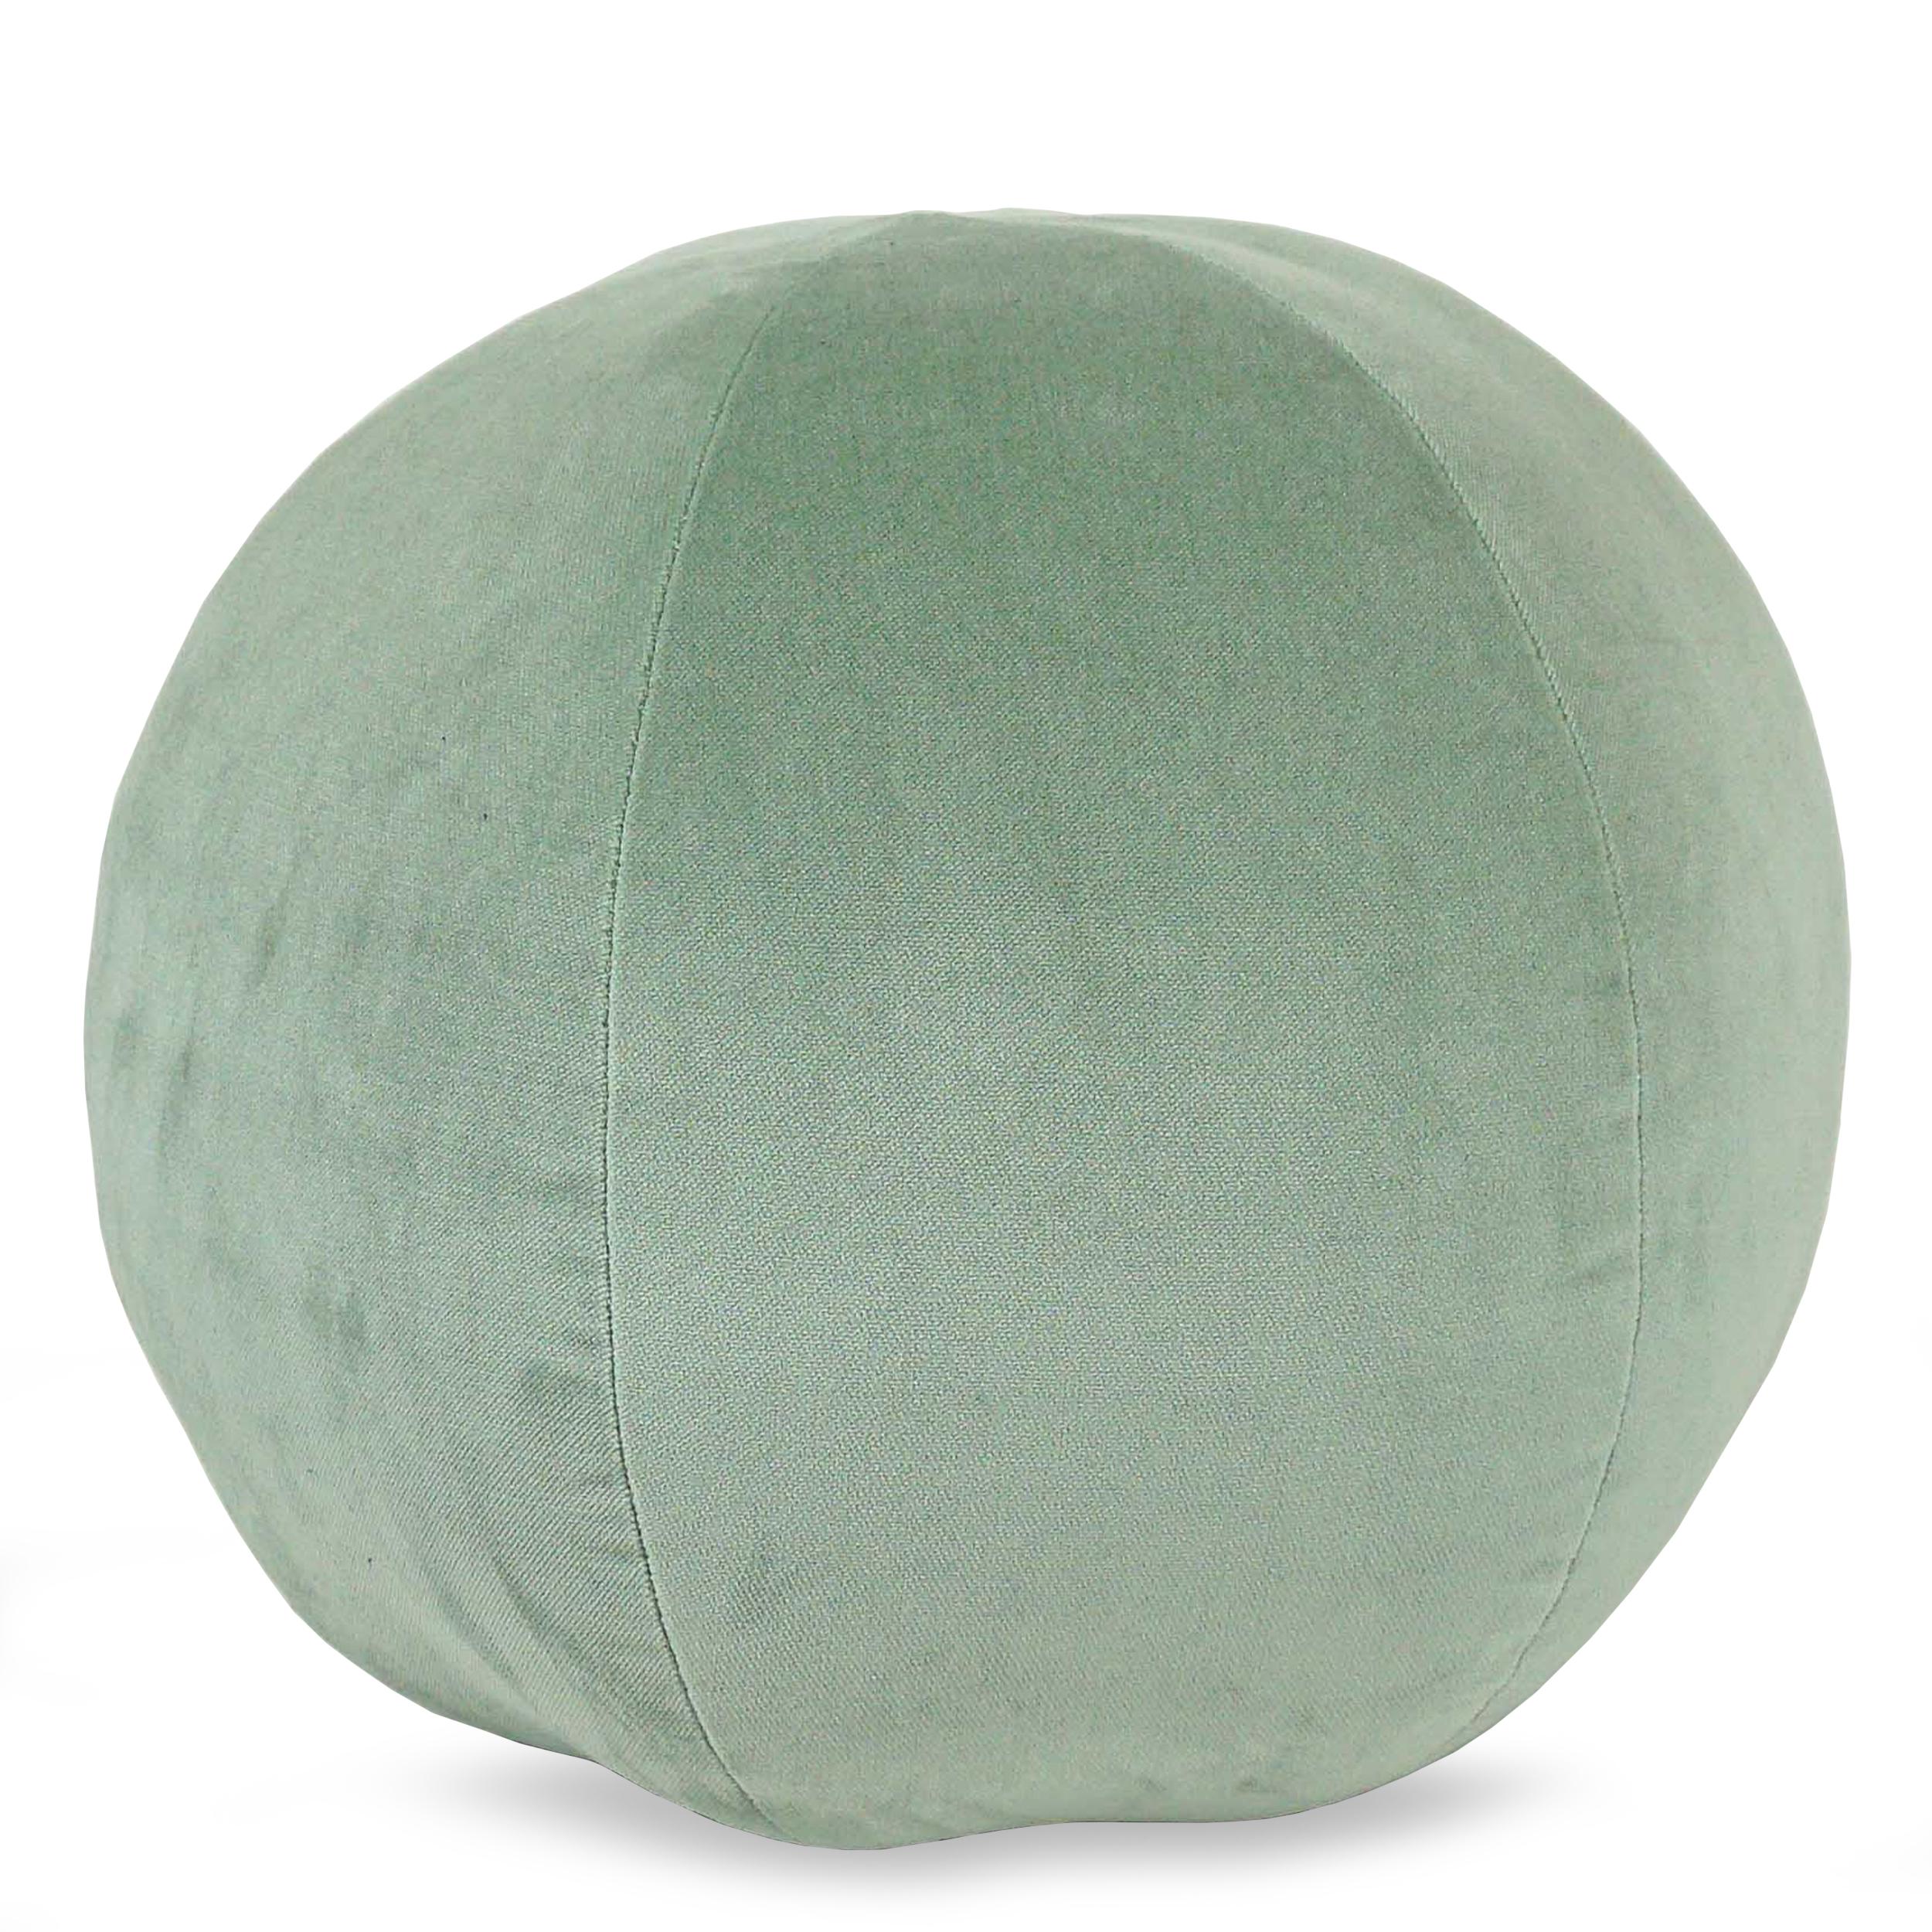 Hand sewn ball pillow is made in a soft light sage velvet fabric by Kravet firmly stuffed with down feathers. Can be customized in any fabric and size adjustments. Ask for current availability in fabric as shown. 

Measurements:
Outside 12” diameter